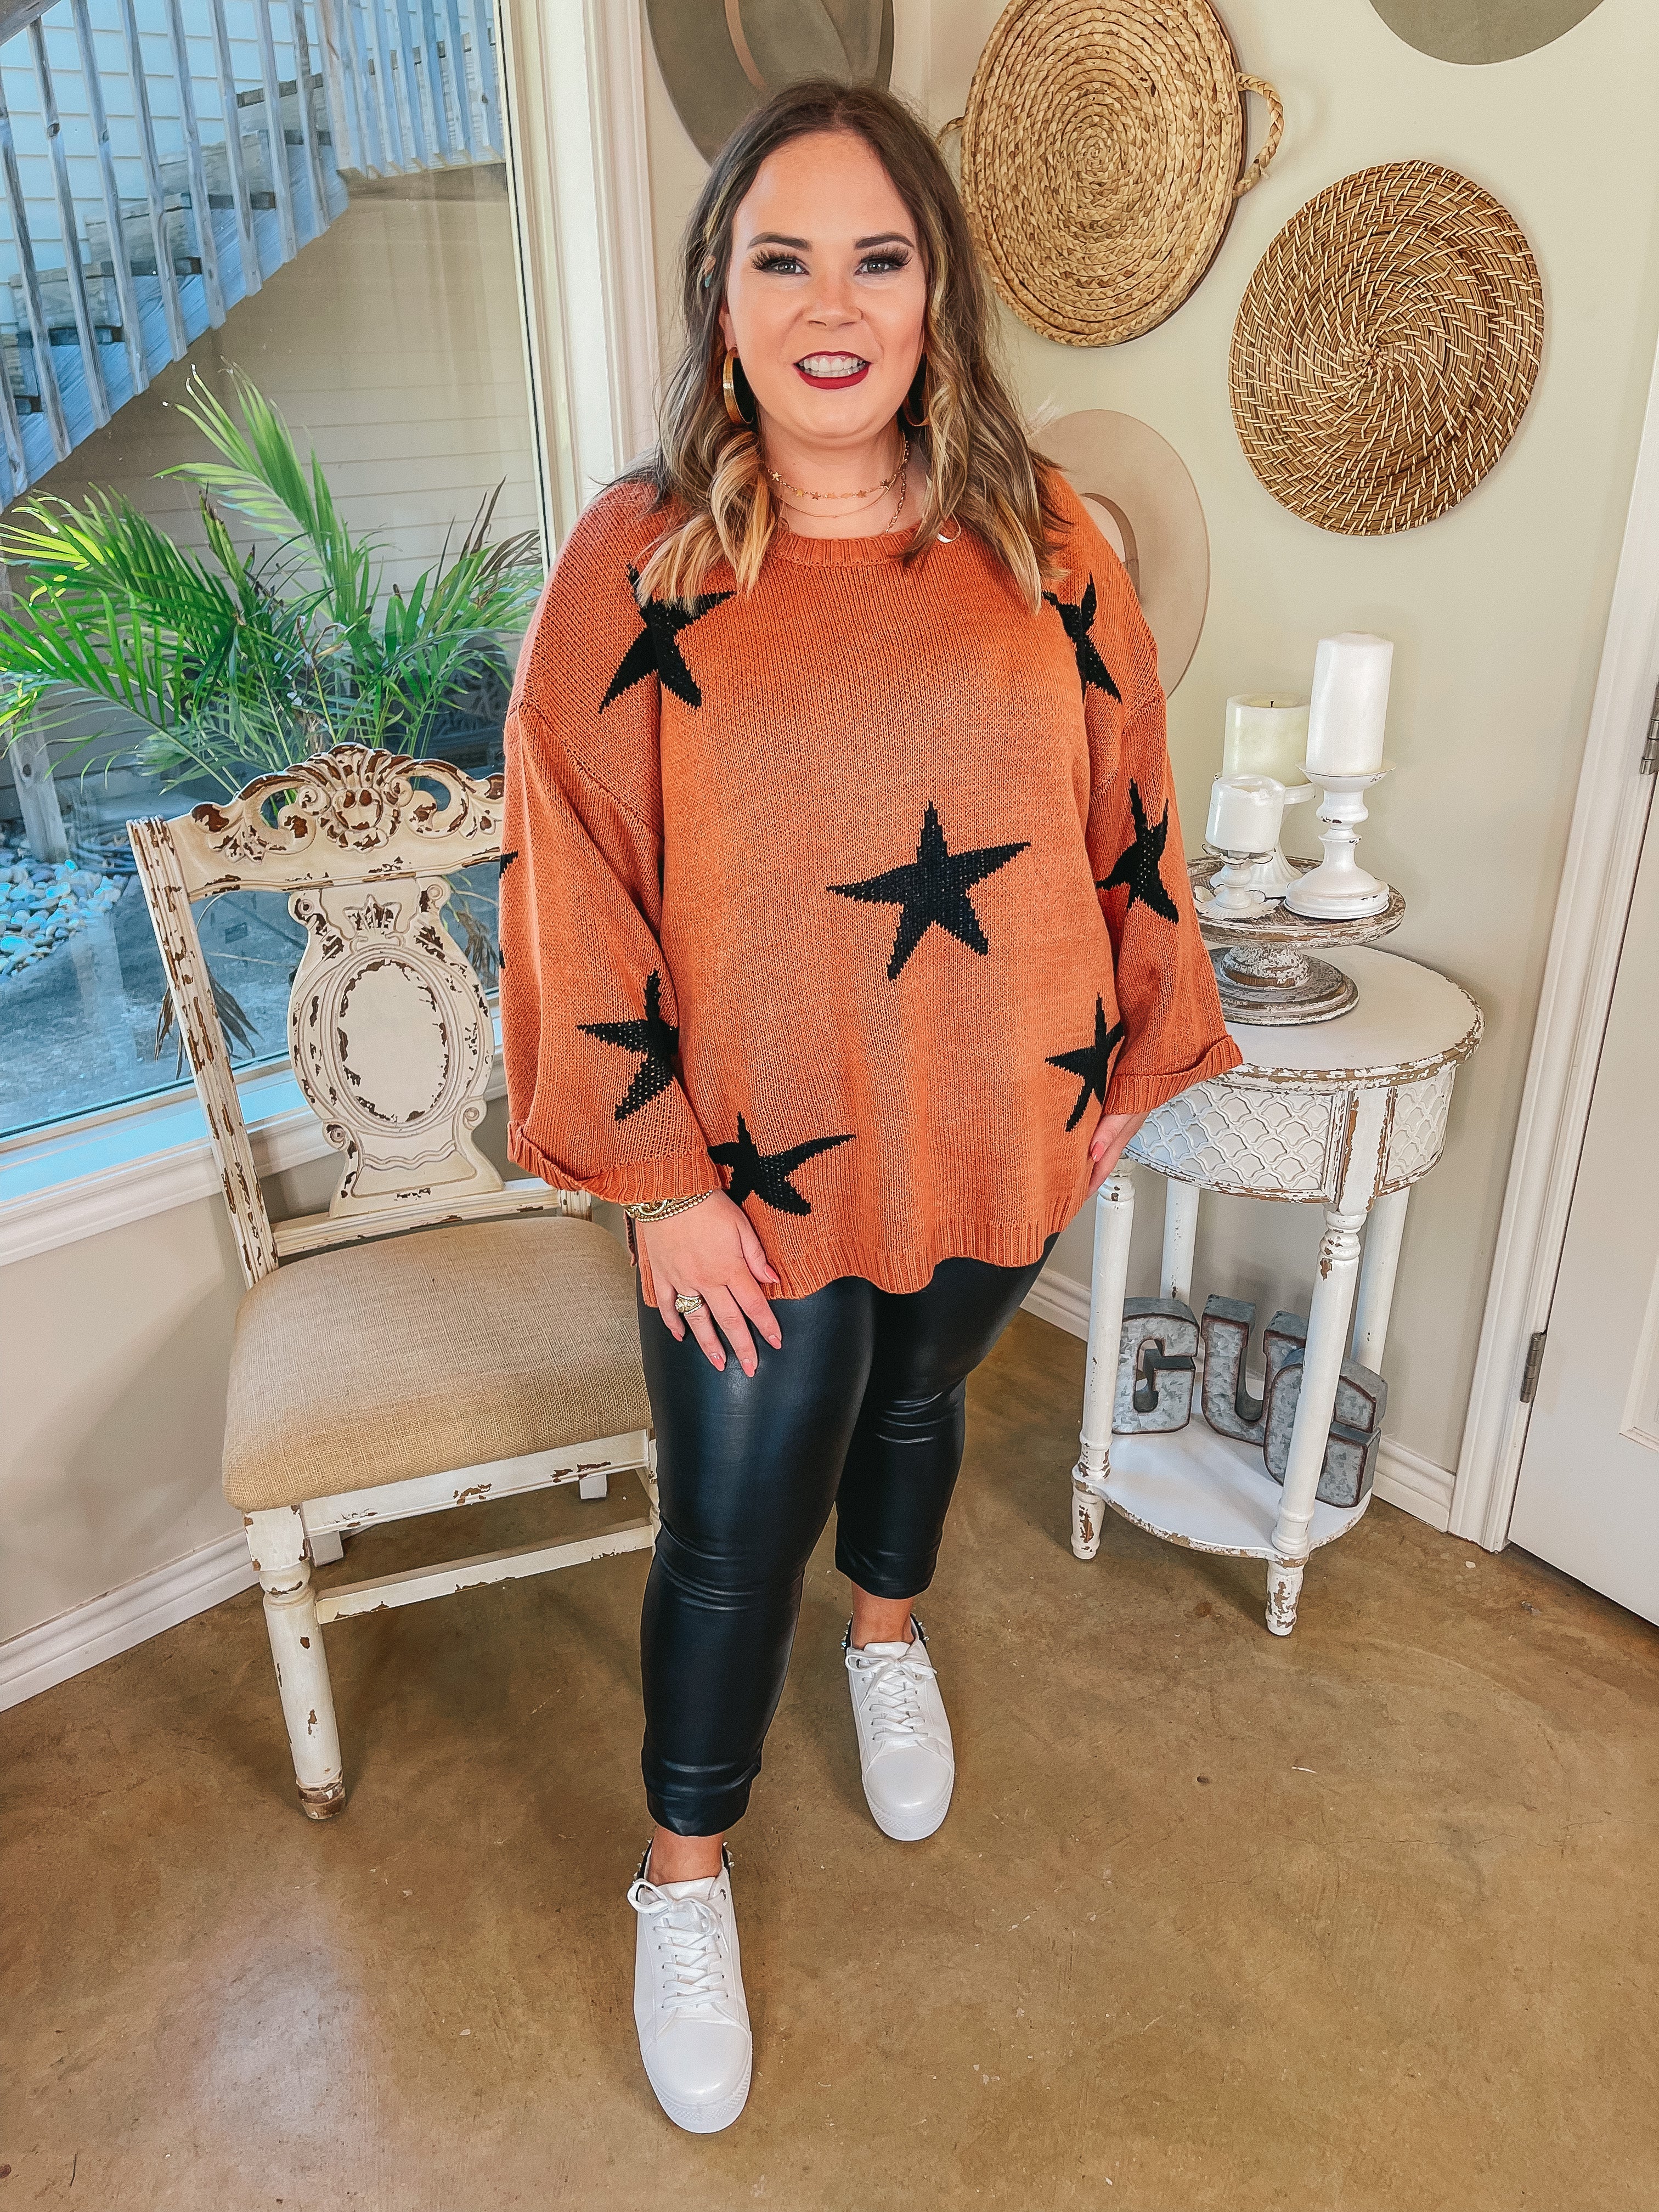 Brightest Dreams Star Print Oversized Sweater in Rust - Giddy Up Glamour Boutique